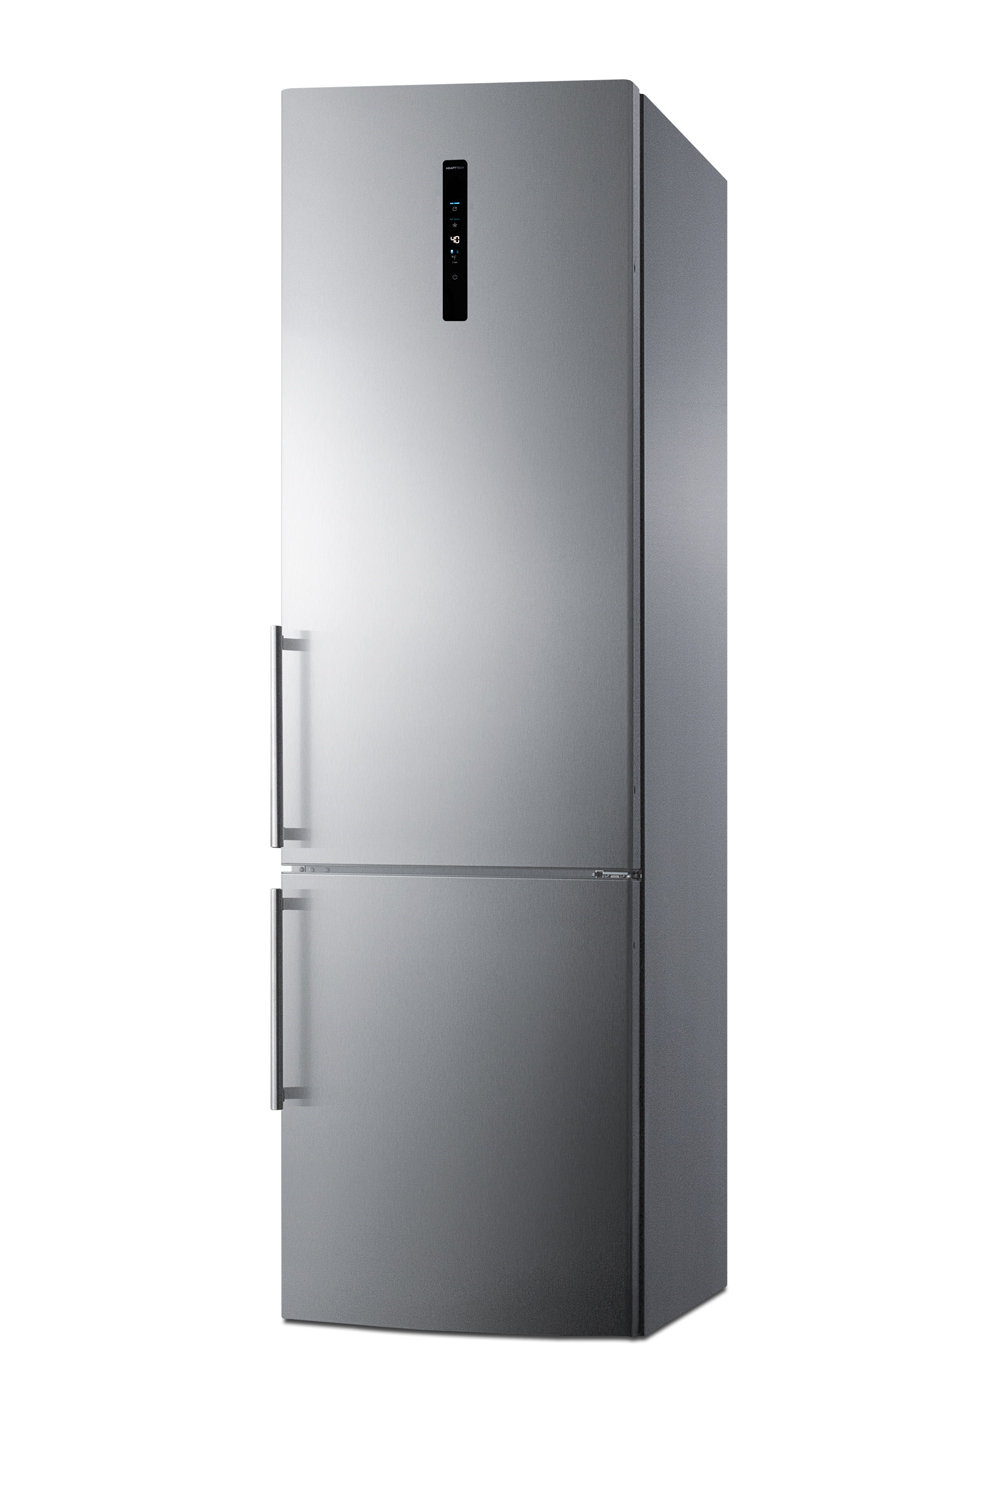 Haier 16.8-cu ft Counter-depth Bottom-Freezer Refrigerator (Stainless)  ENERGY STAR in the Bottom-Freezer Refrigerators department at